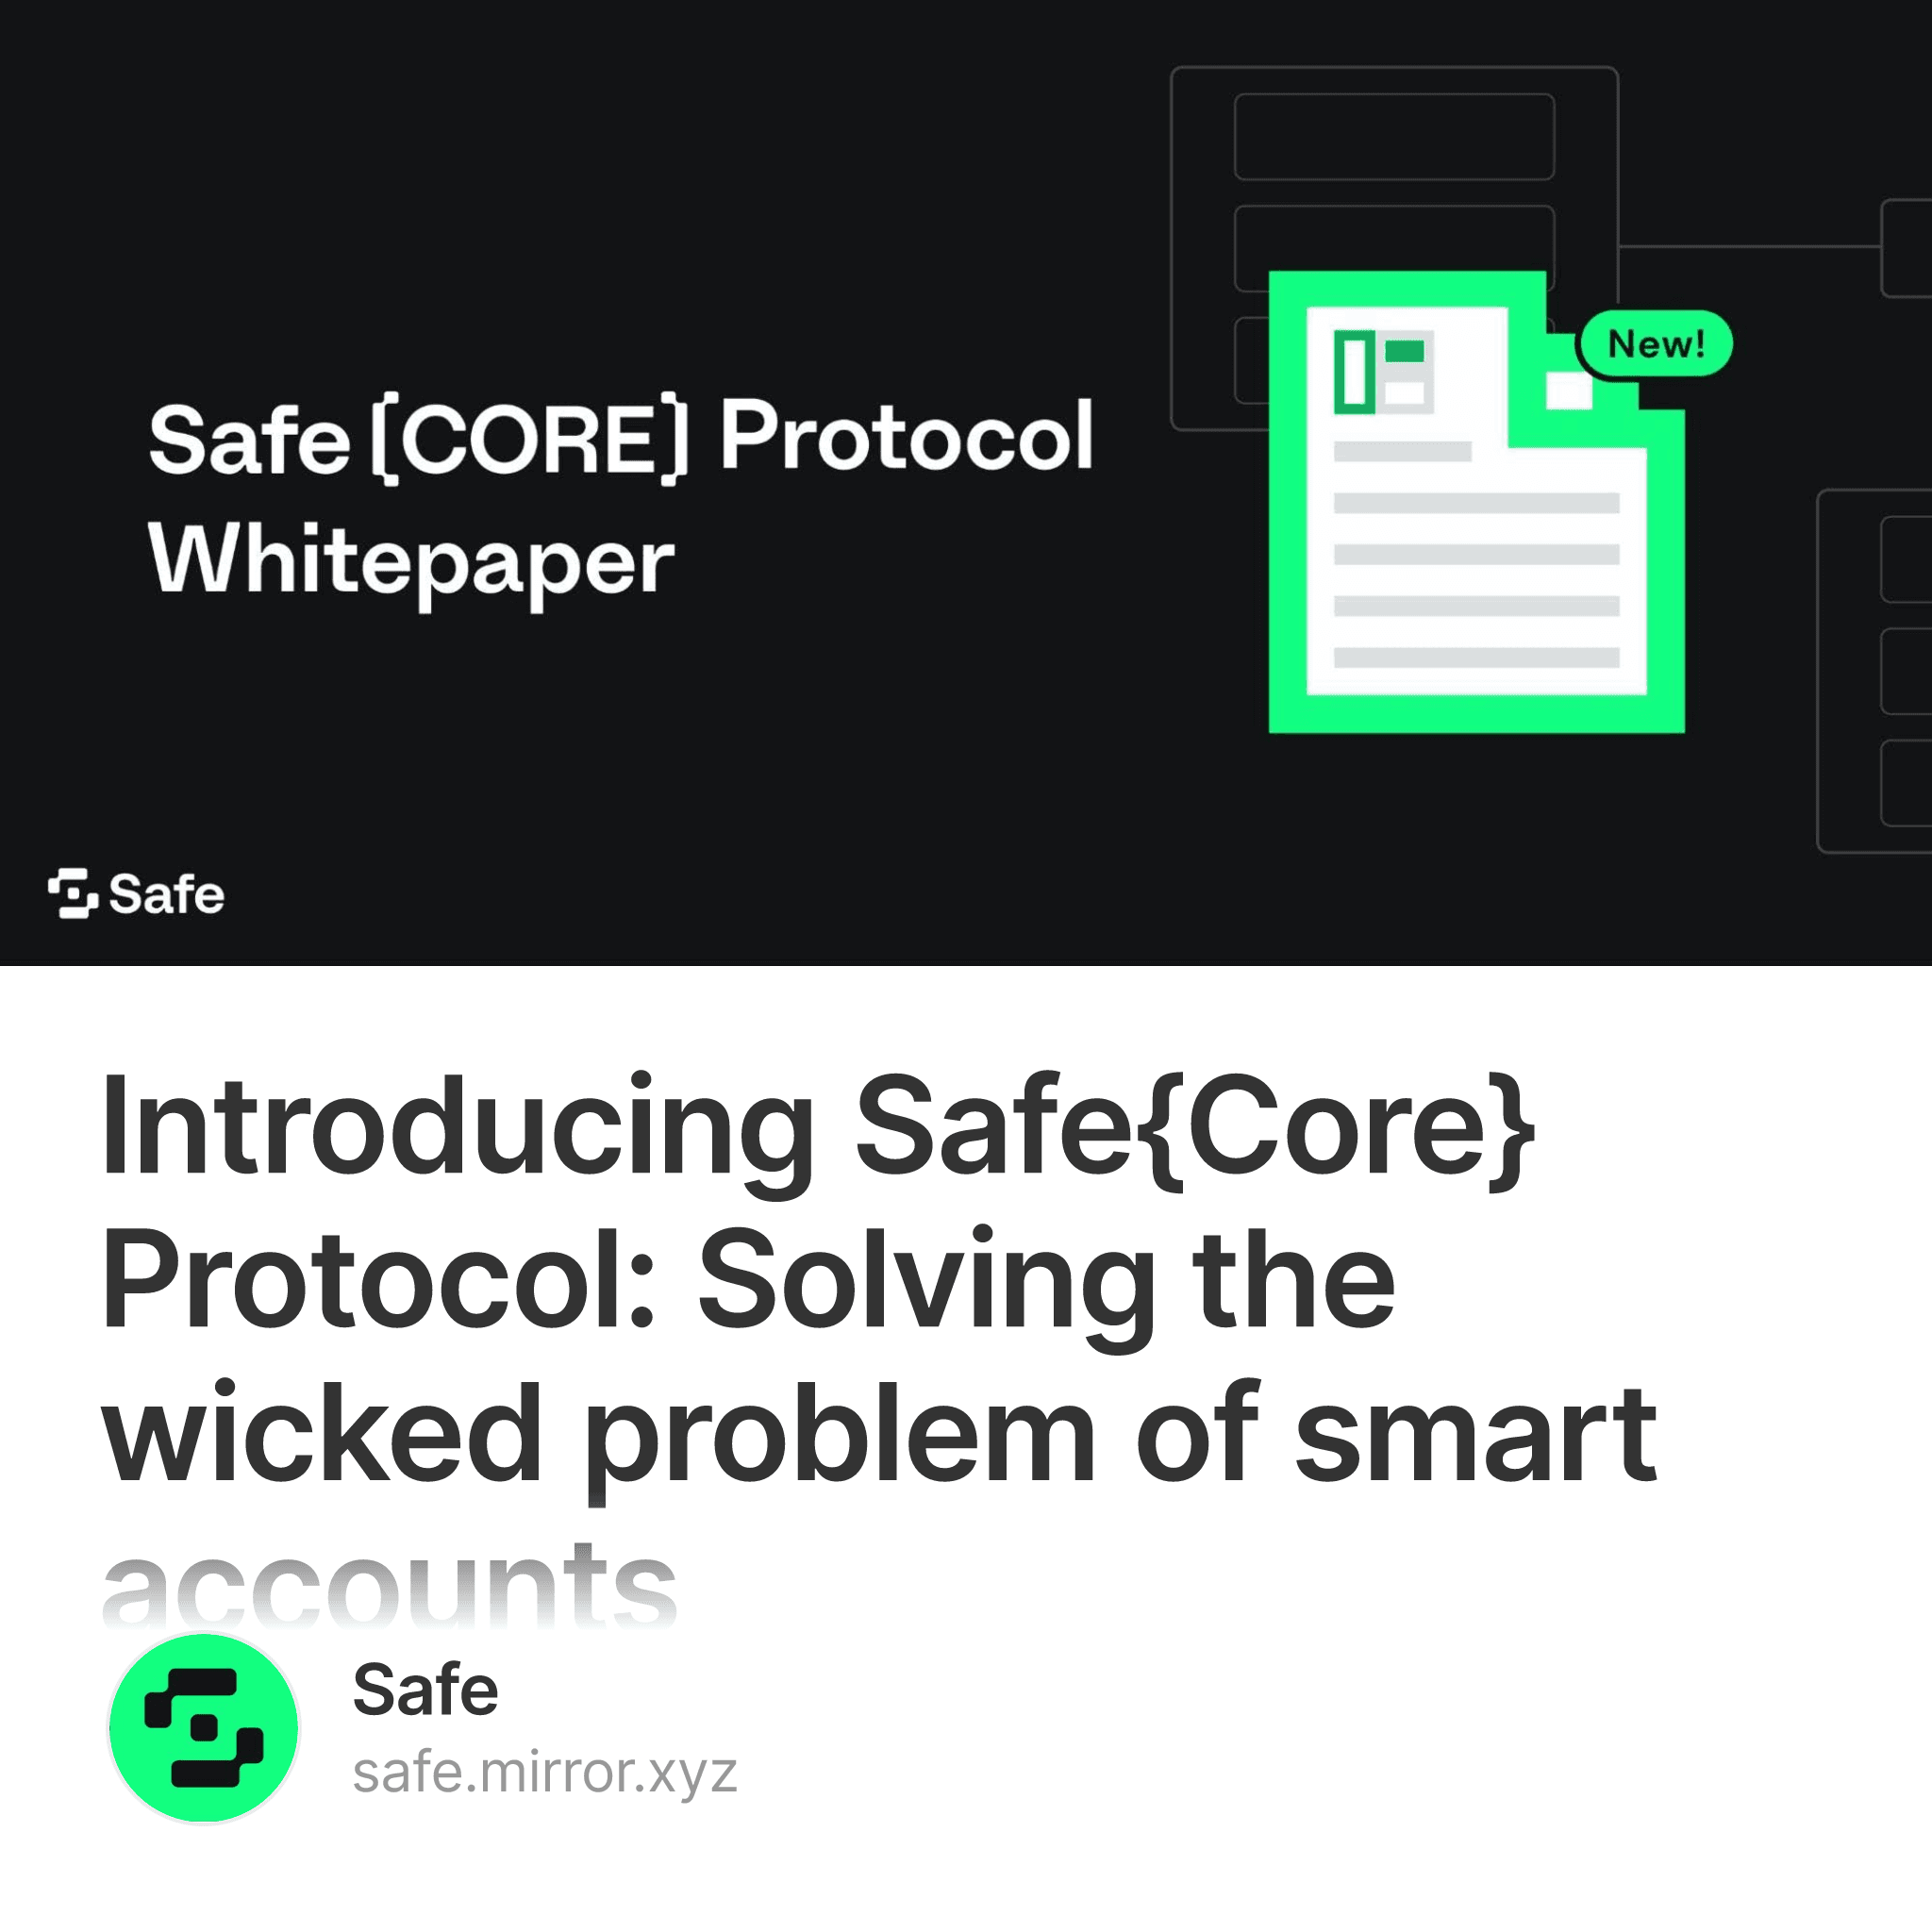 Introducing Safe{Core} Protocol: Solving the wicked problem of smart accounts  171/500